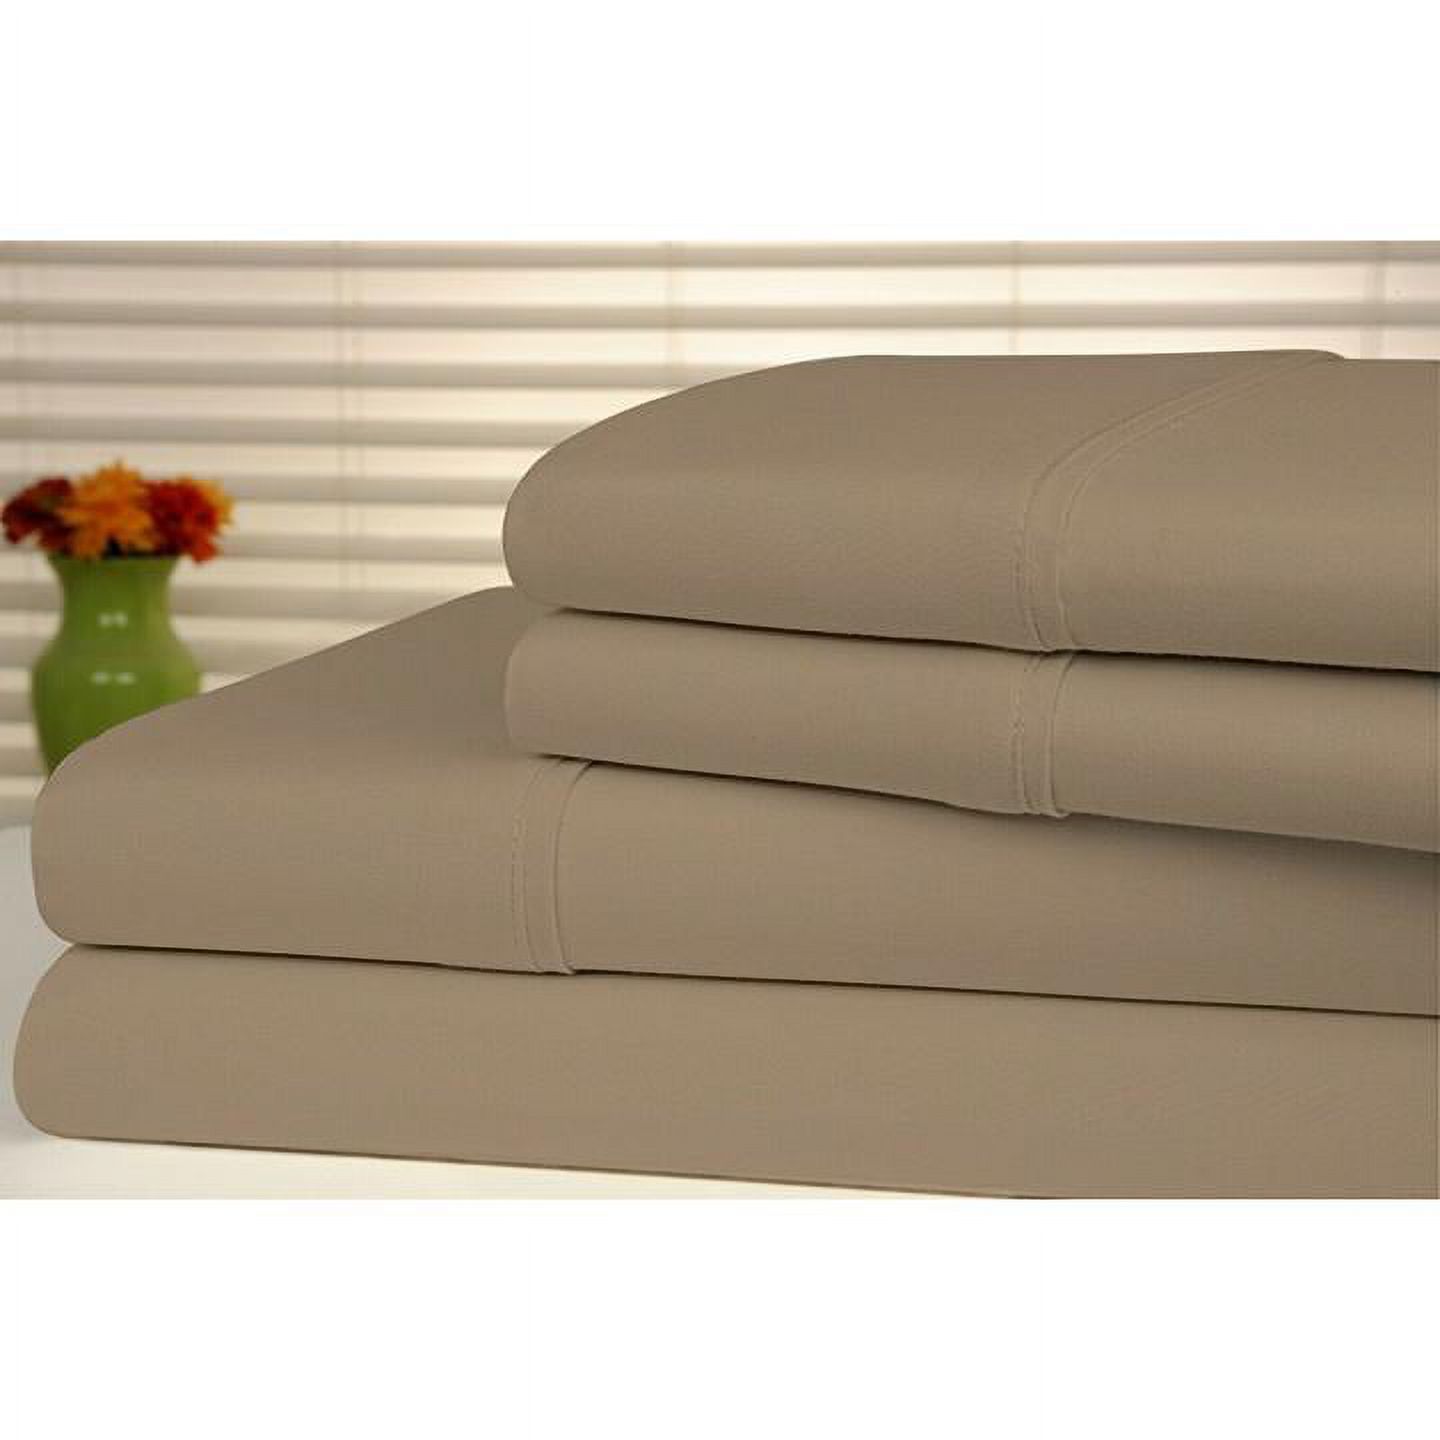 Bamboo Comfort  King Size Bamboo Luxury Solid Sheet Set, White - 4 Piece - image 13 of 21